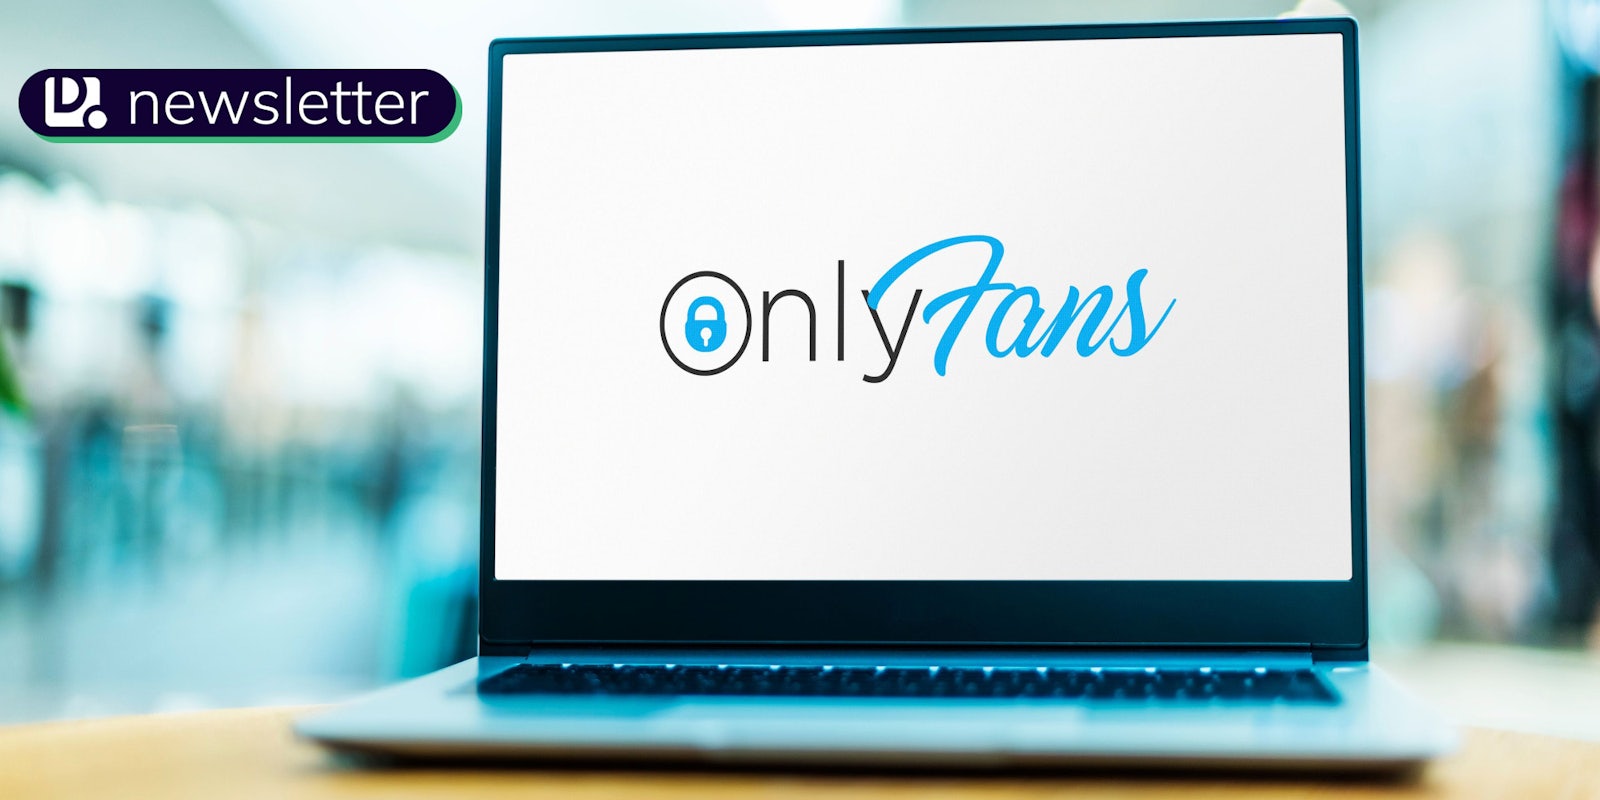 A laptop with the OnlyFans logo on it. The Daily Dot newsletter logo is in the top left corner.